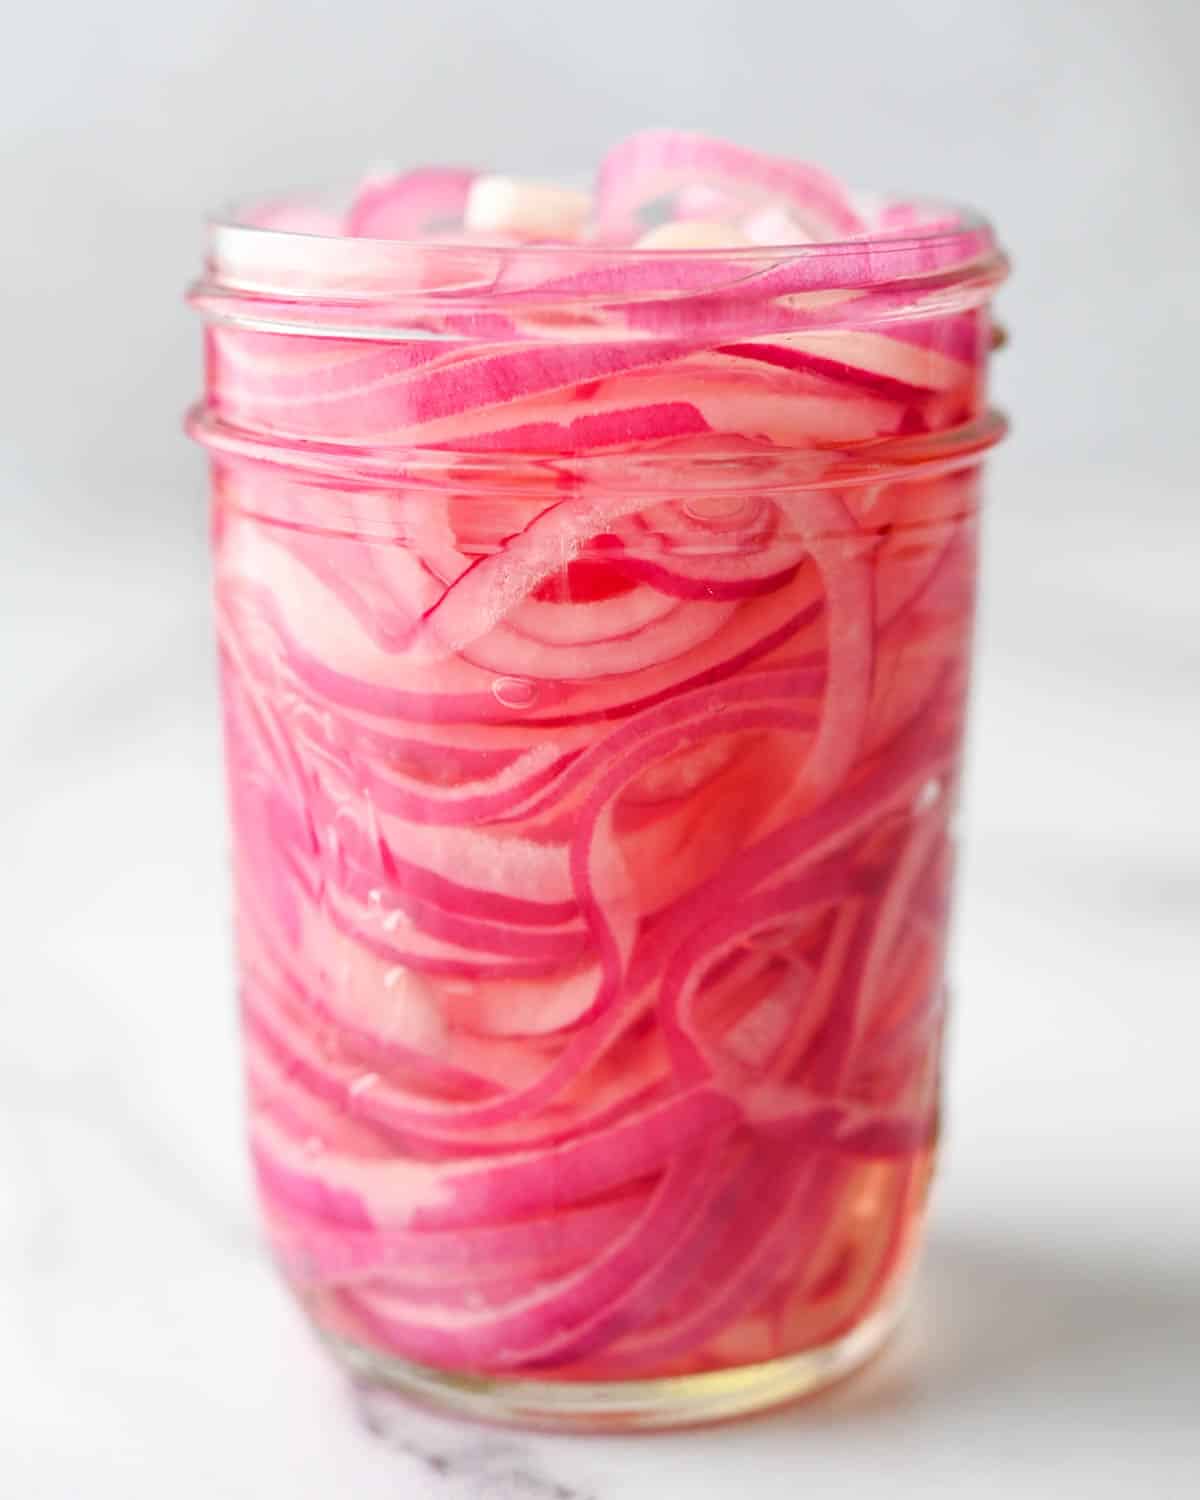 I am seeing the rings of the pink pickled onions in brine through a clear jar.